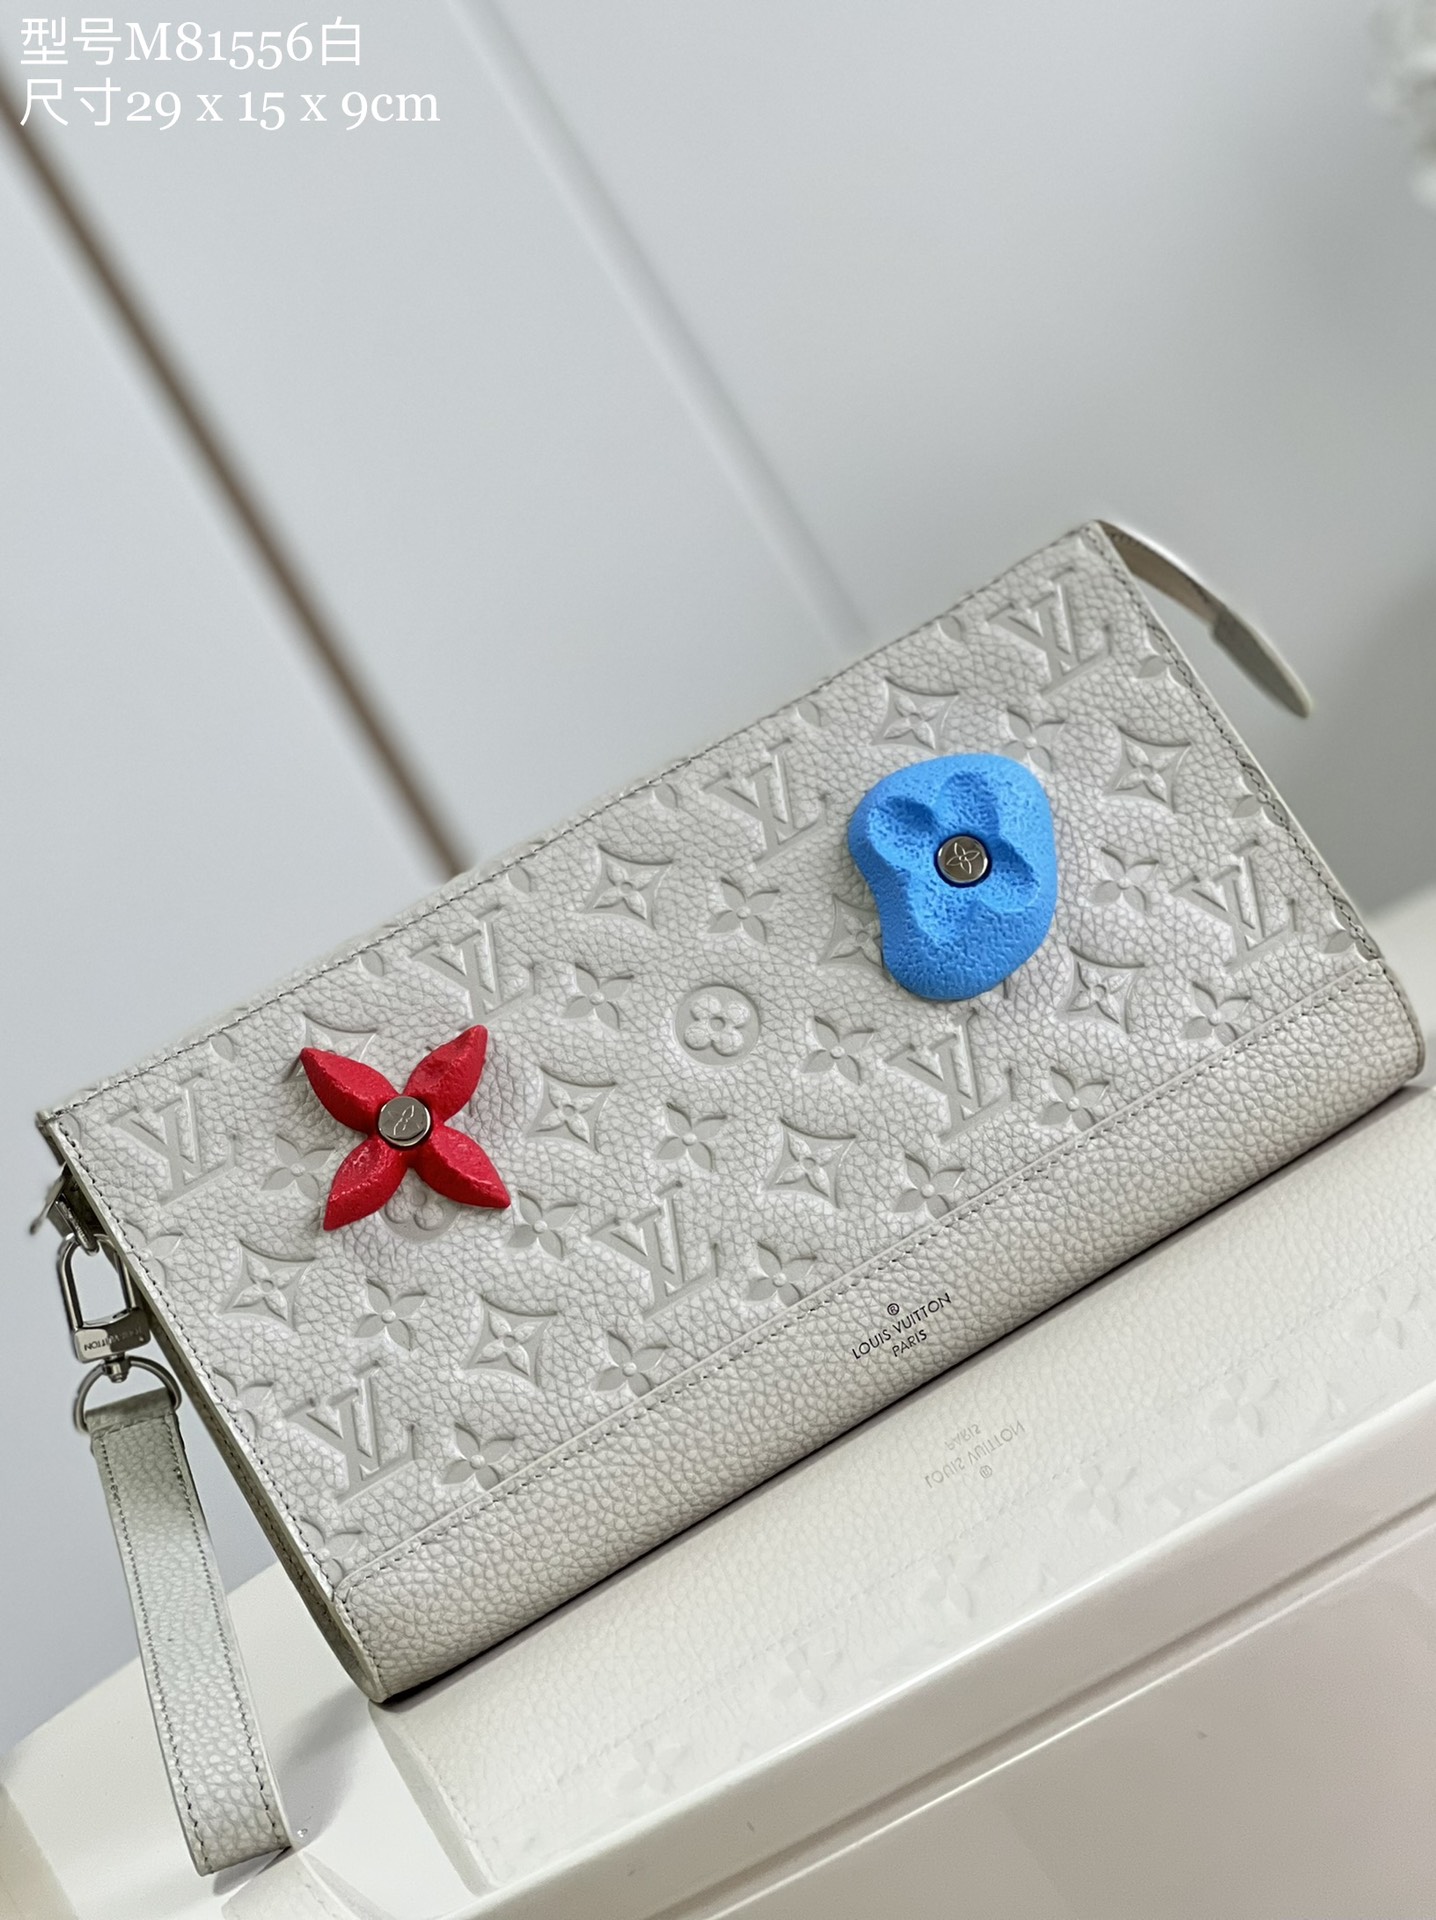 Louis Vuitton Handbags Clutches & Pouch Bags White Taurillon Fall/Winter Collection Sweatpants M81556